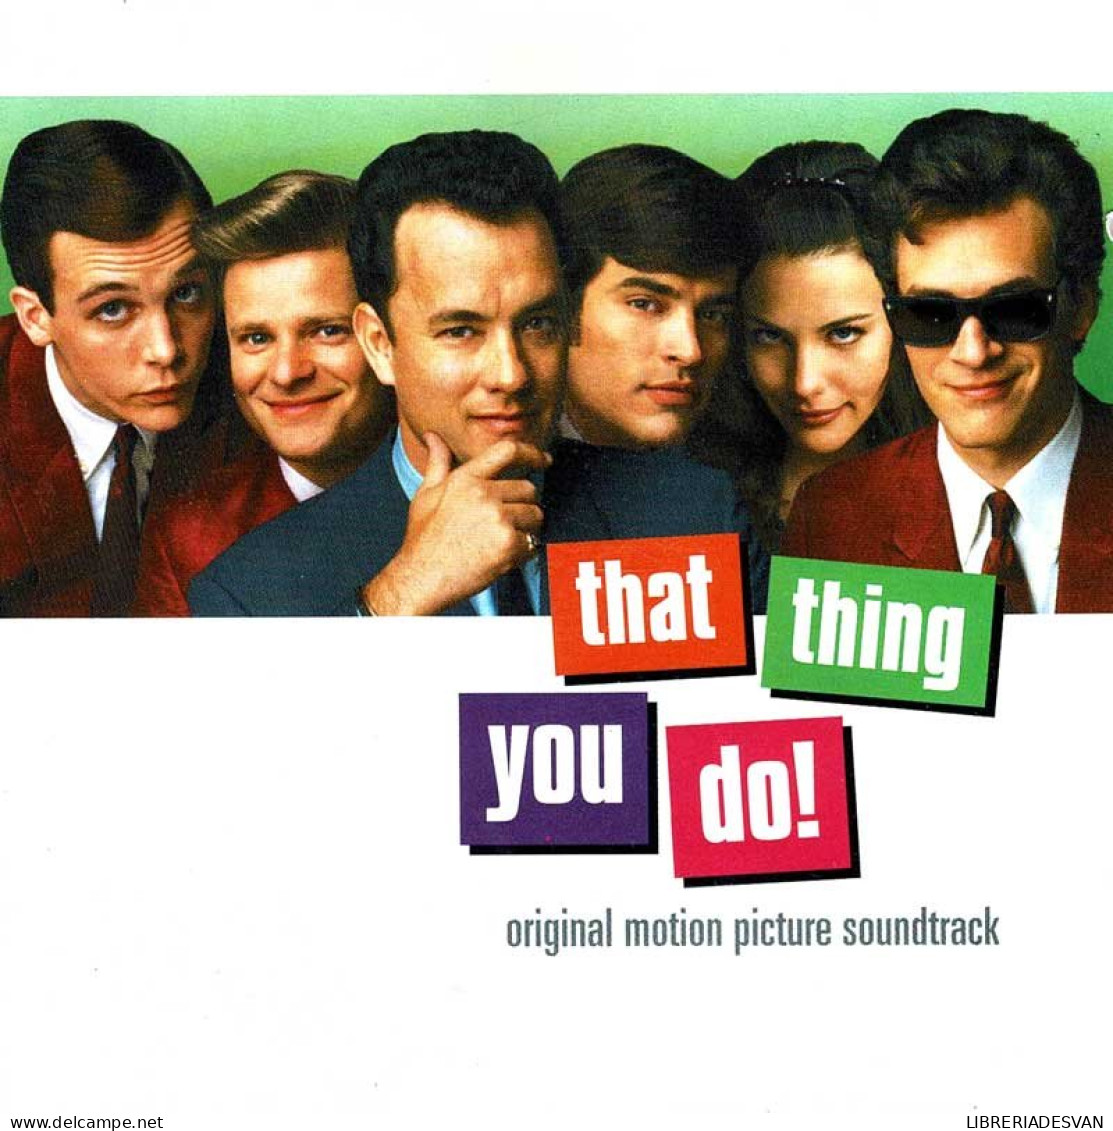 That Thing You Do! - Original Motion Picture Soundtrack. CD - Musica Di Film